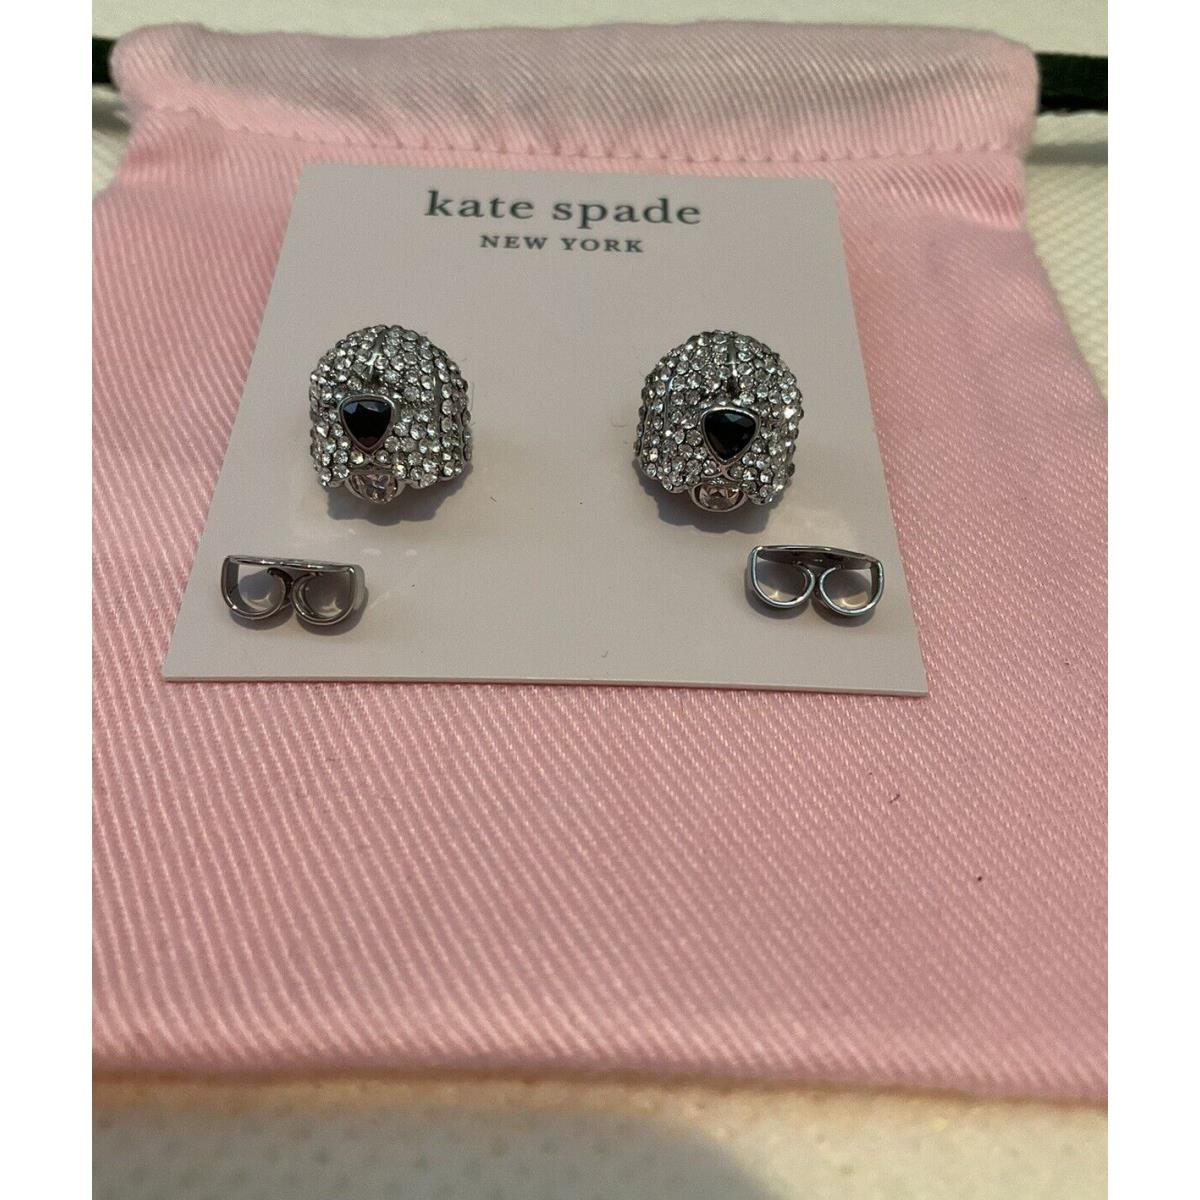 Kate Spade Best In Show Sheep Dog Stud Earrings Silver Tone Puppy Clear Stone